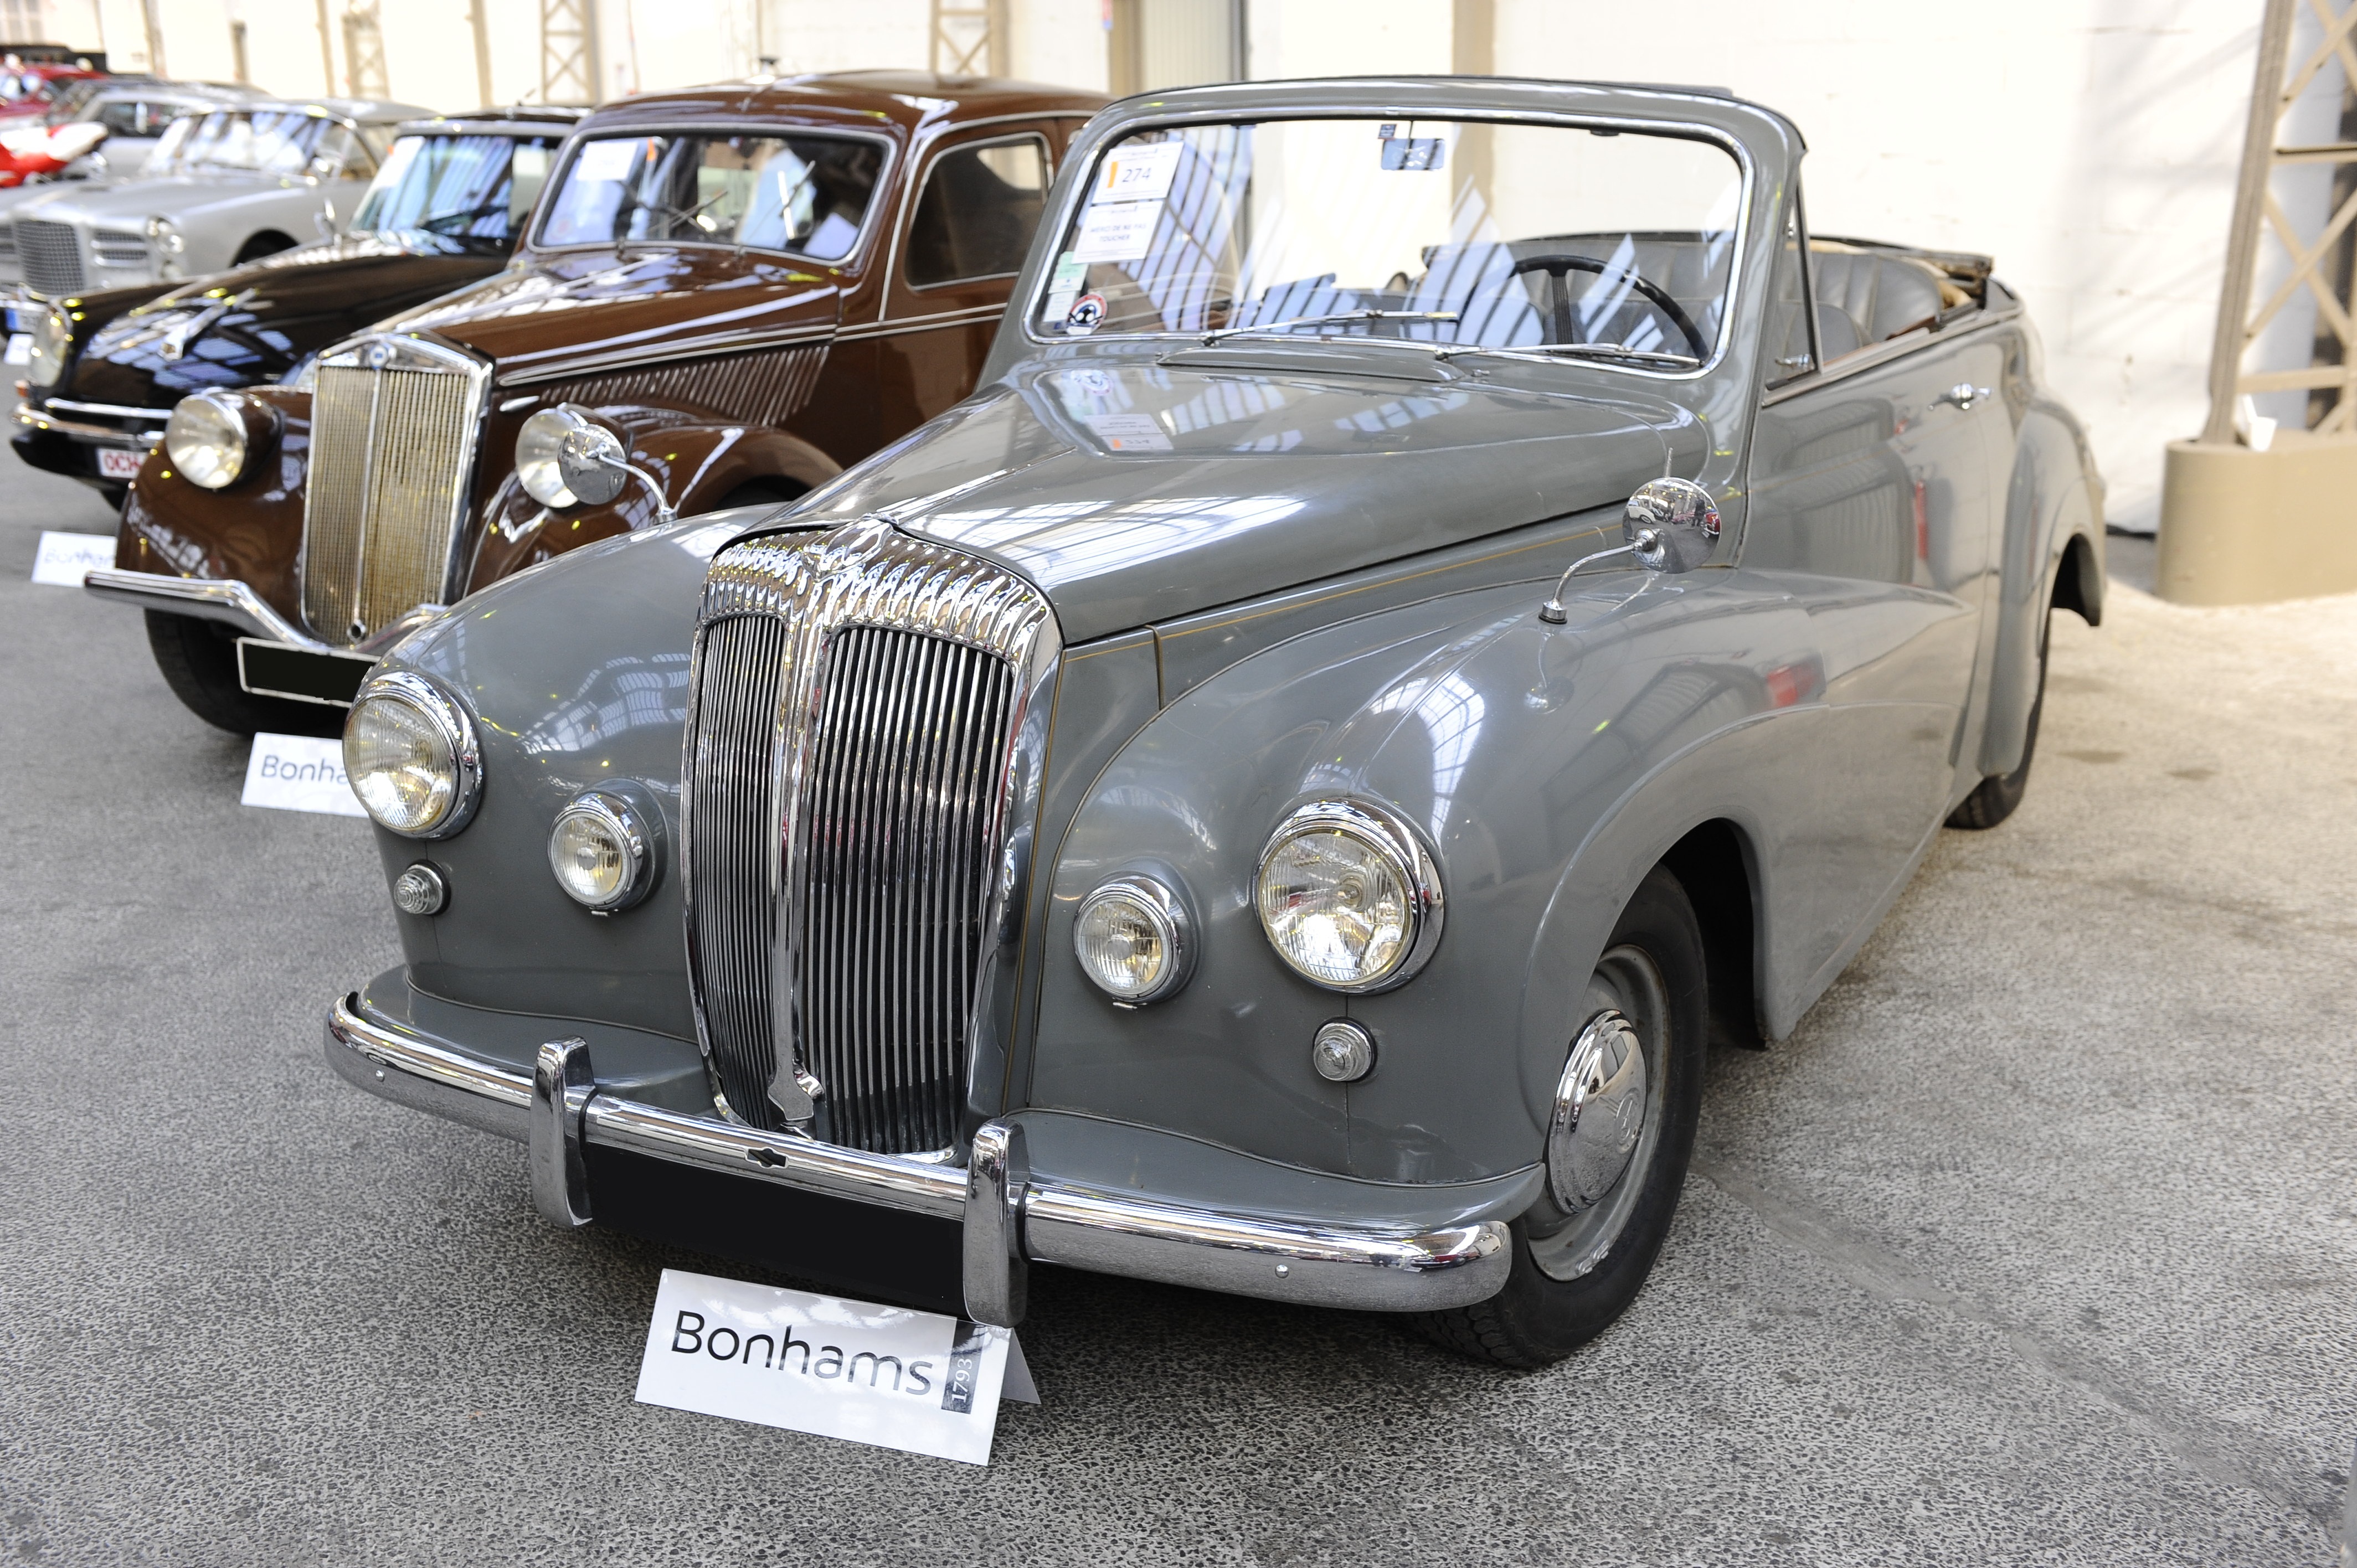 Daimler Conquest Century drophead coupe 1956 | Flickr - Photo Sharing!